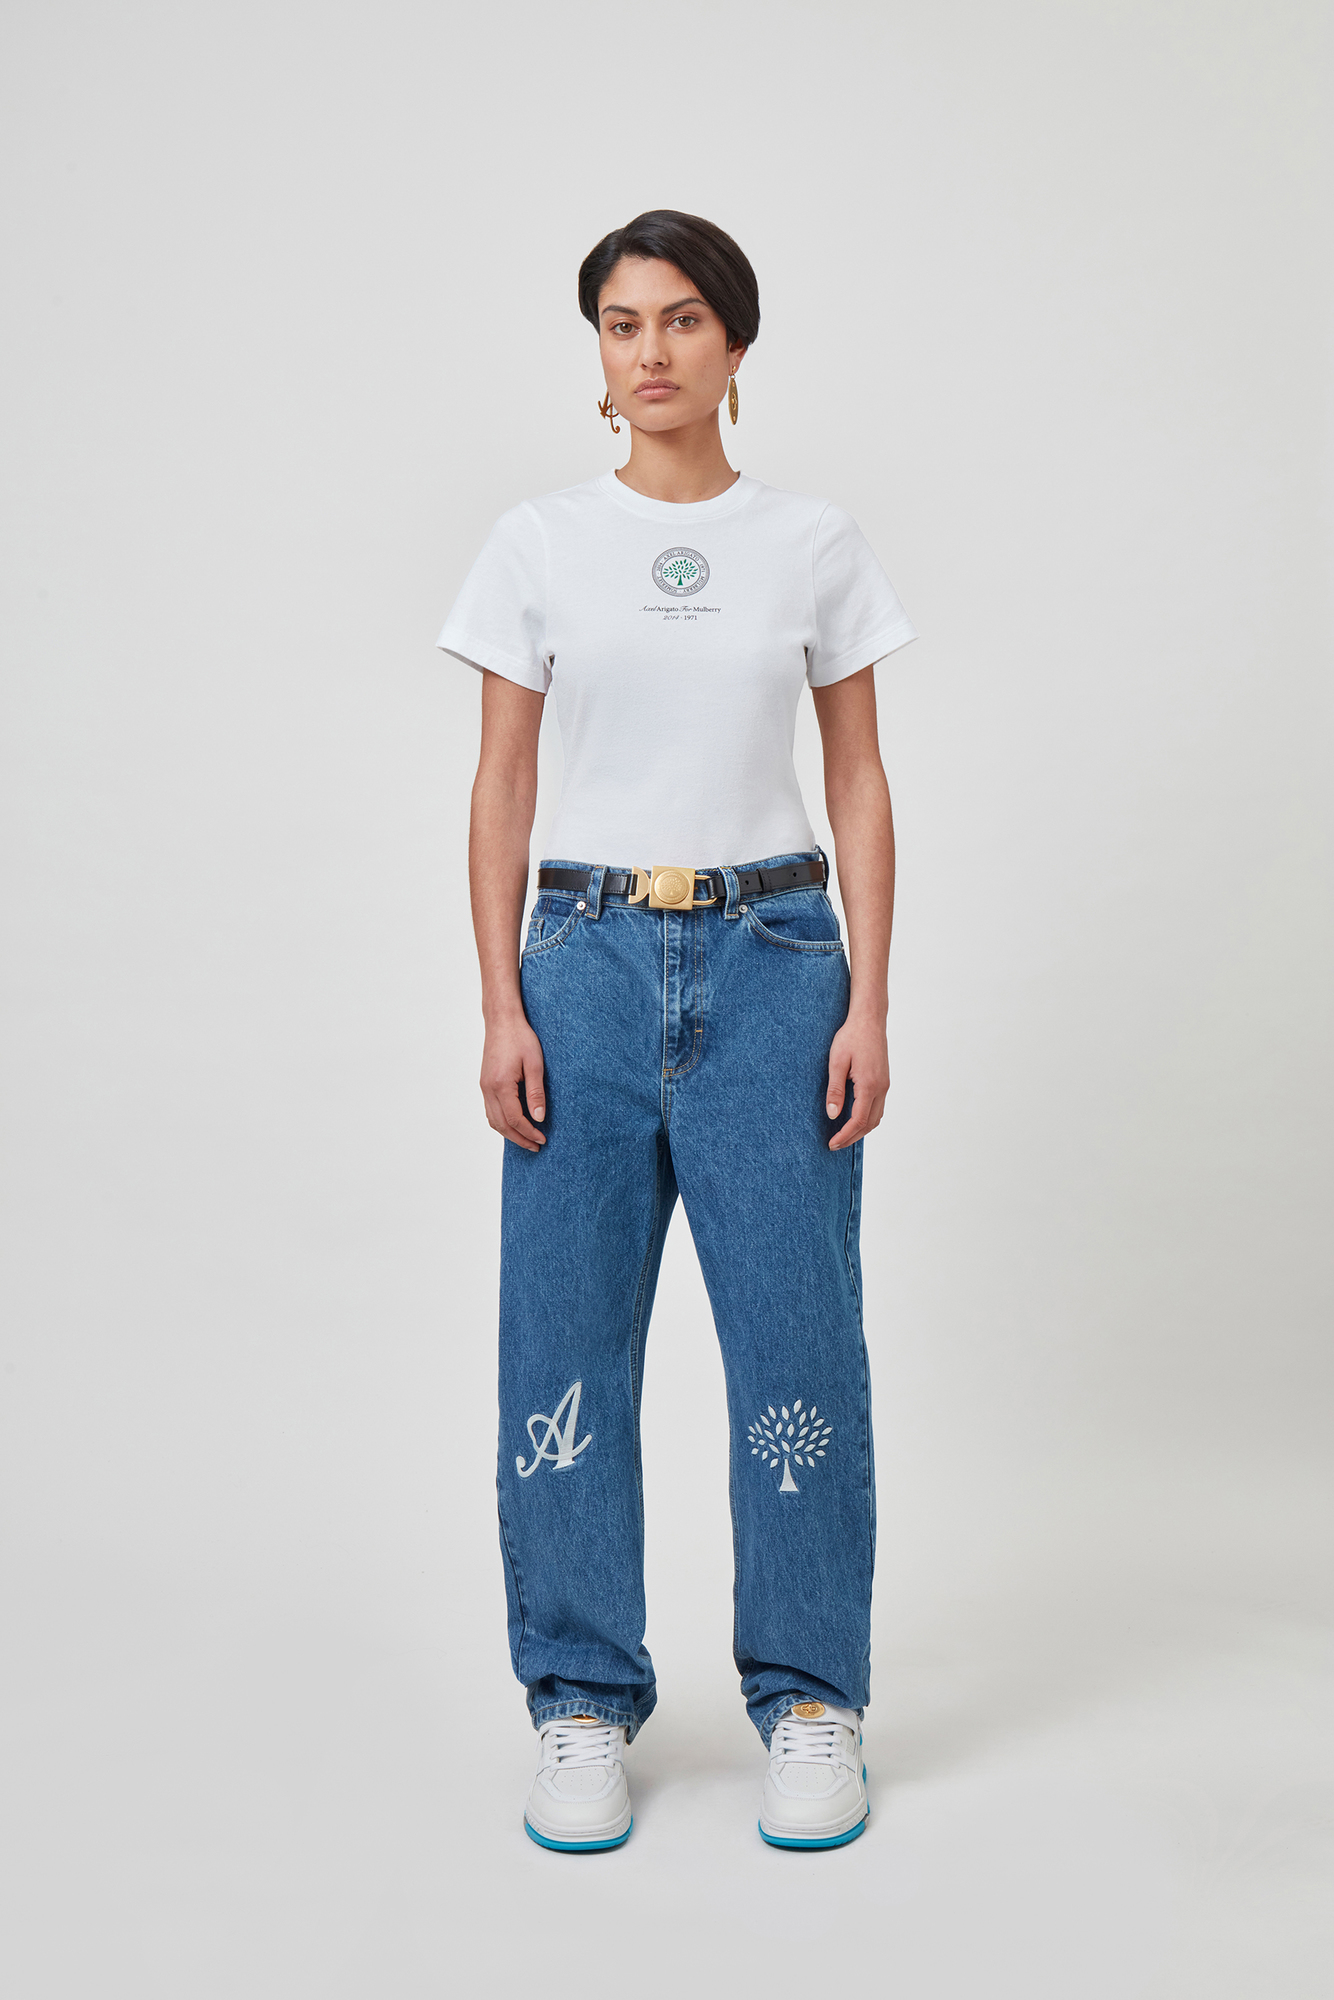 AA x Mulberry Jeans